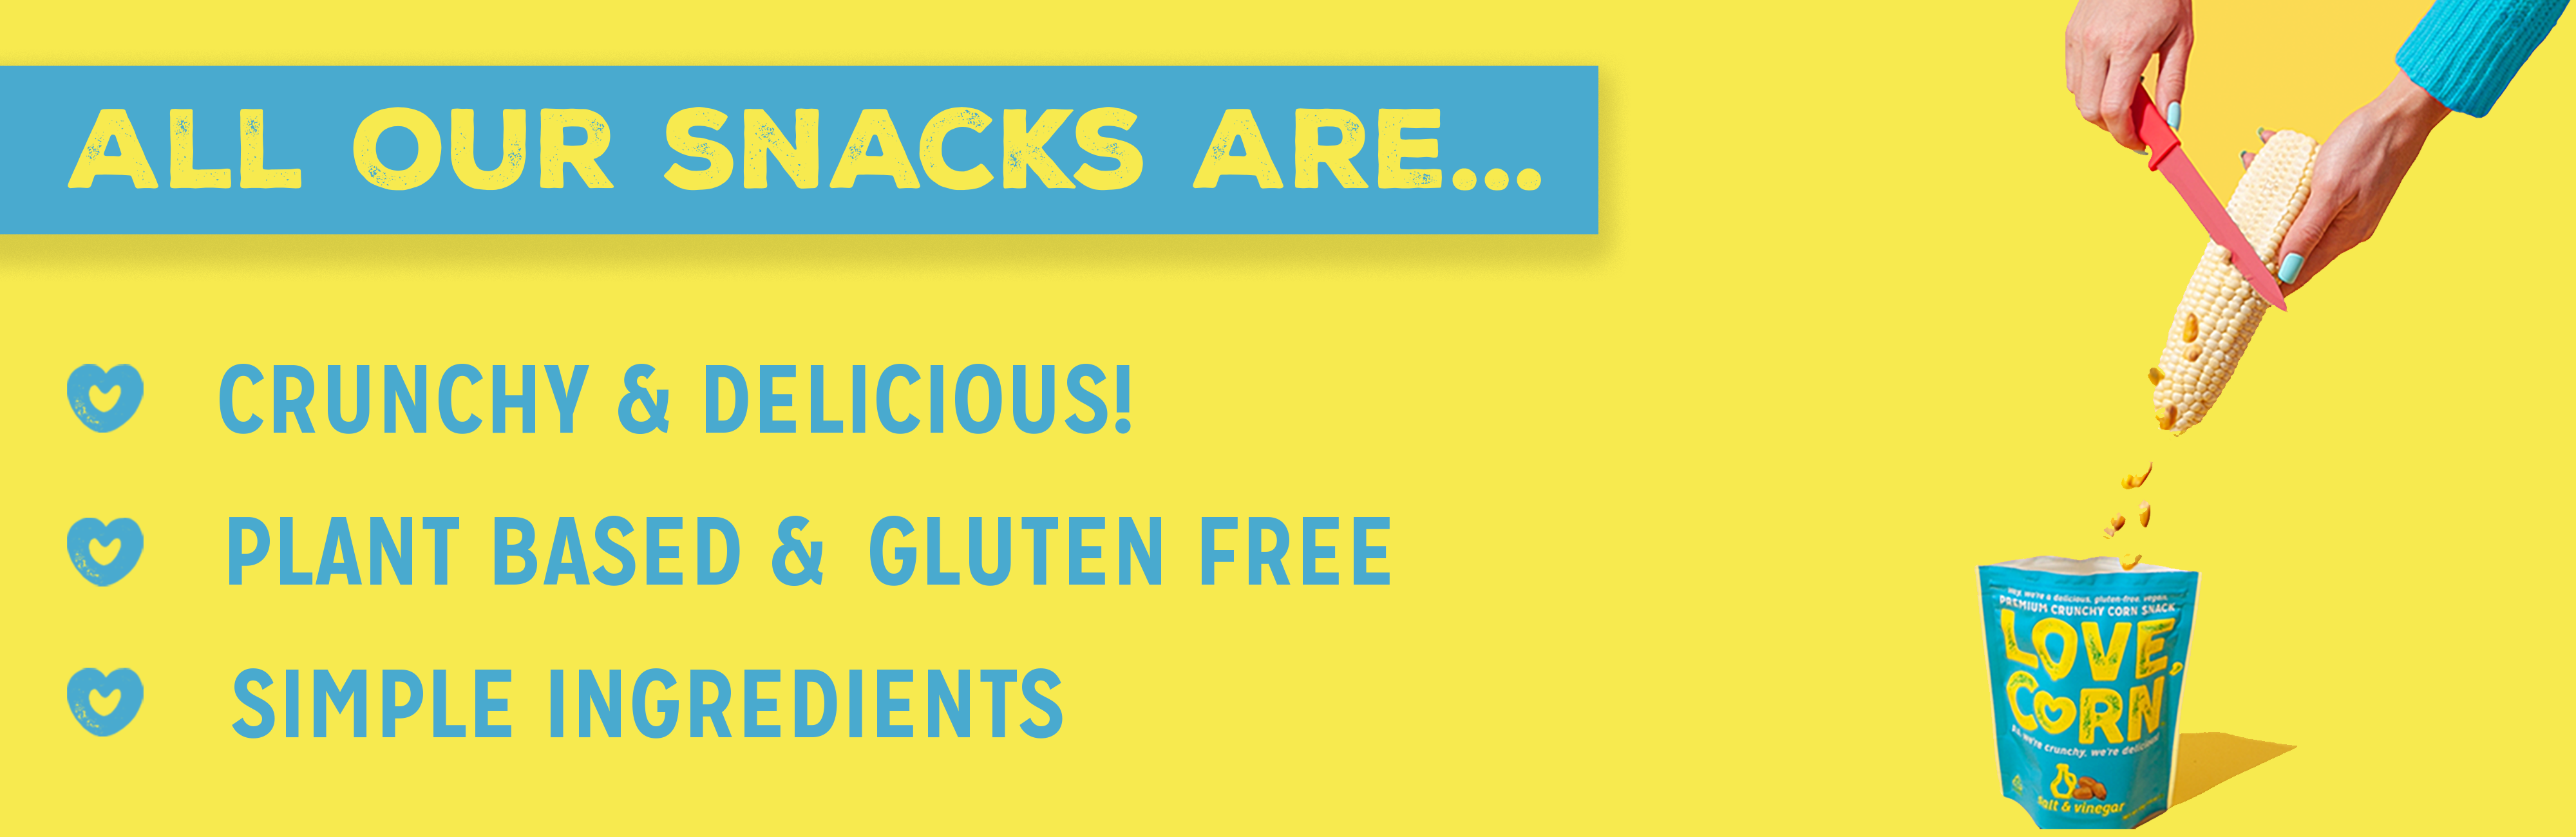 All Our Snacks are Crunchy & Delicious, Plant Based & Gluten Free, Simple Ingredients